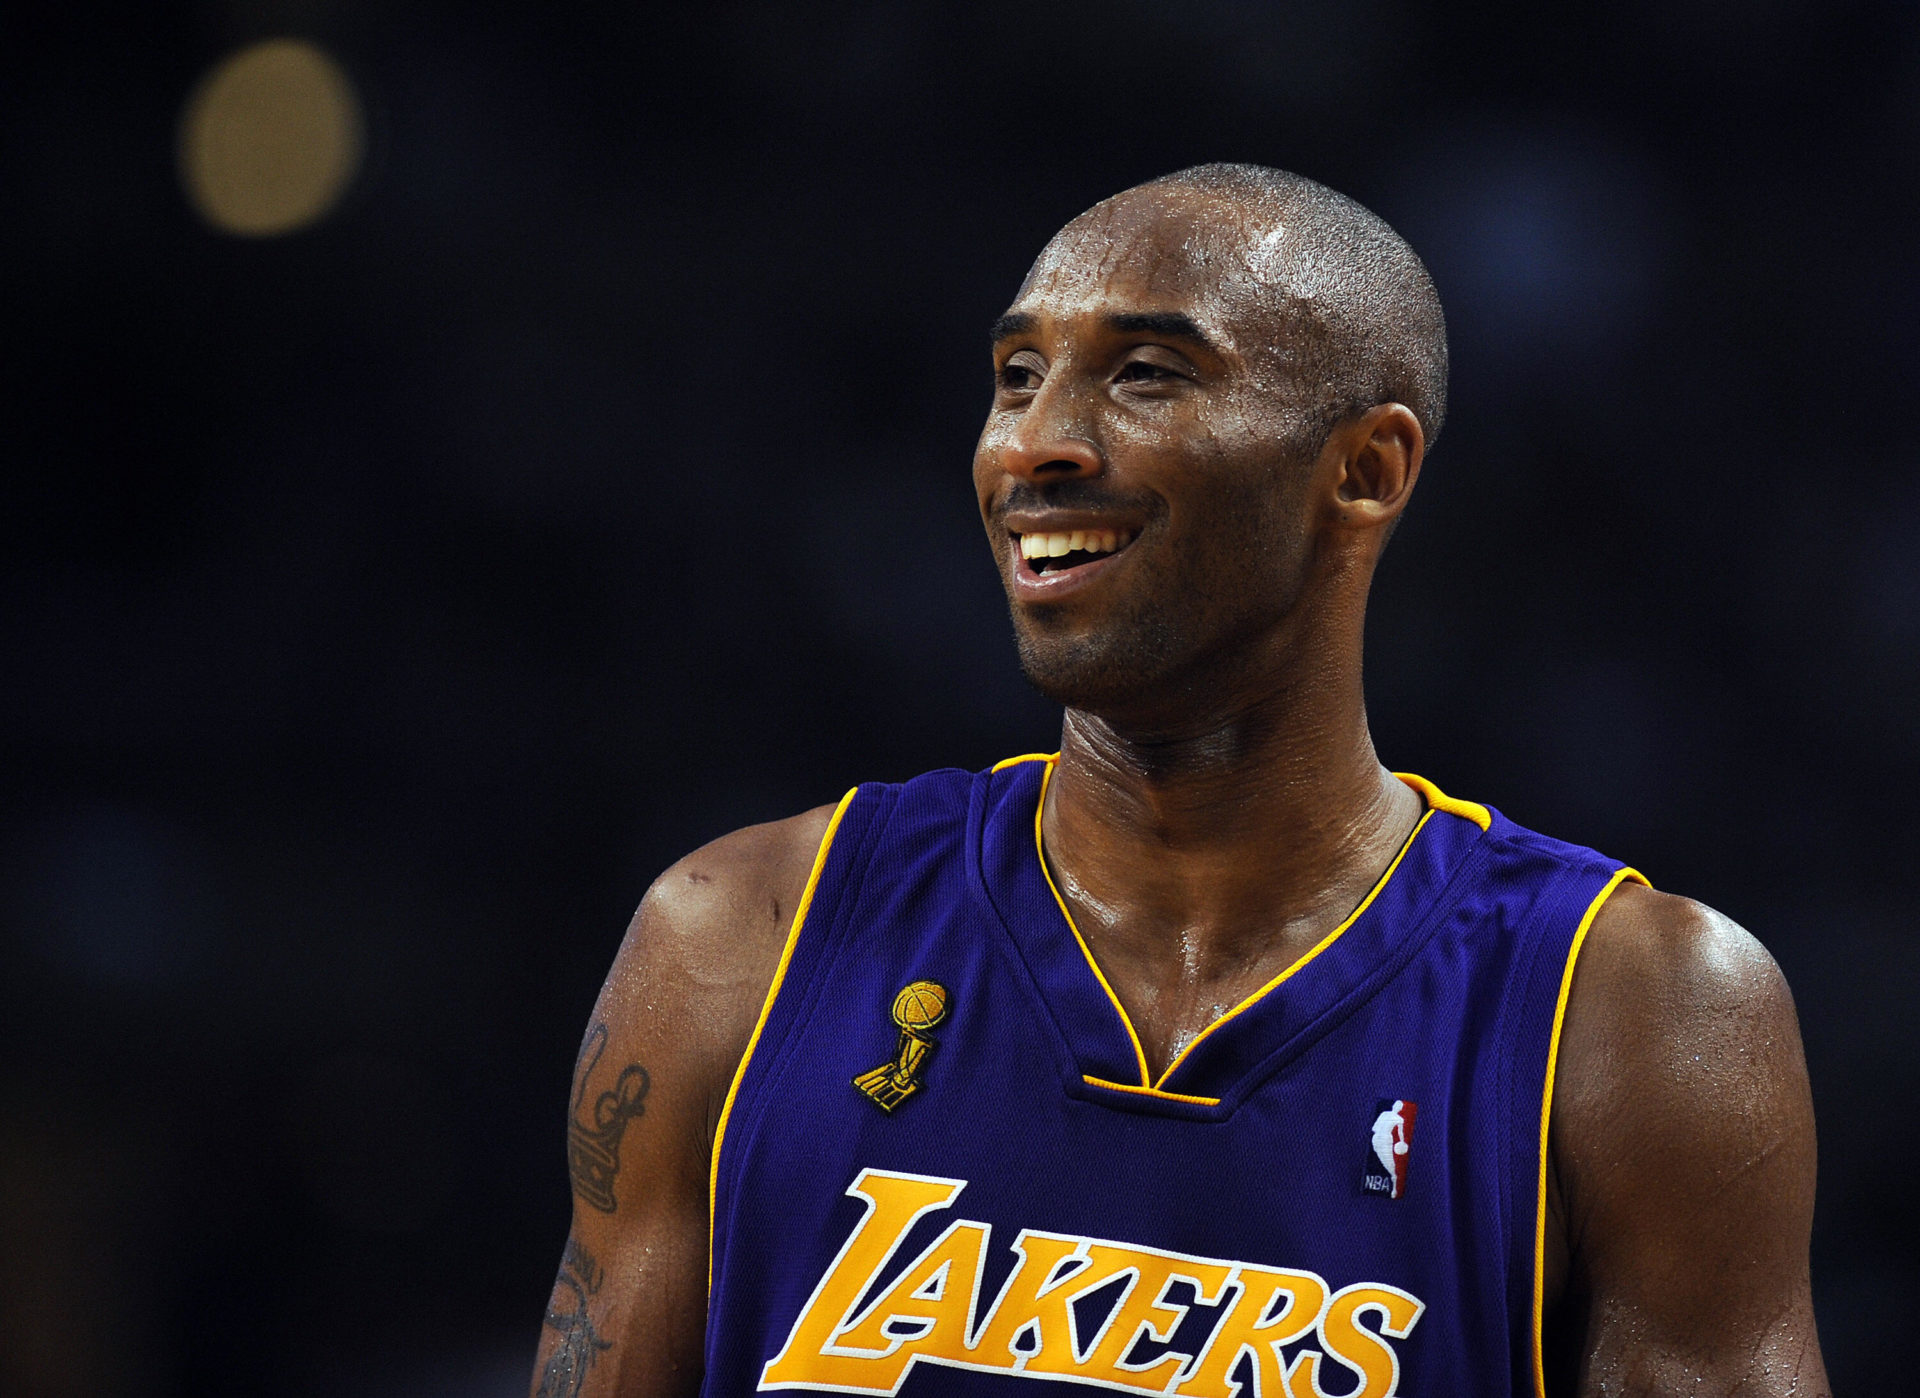 Los Angeles Lakers' Kobe Bryant reacts during the Game 6 of the 2008 NBA Finals in Boston, Massachusetts, June 17, 2008.